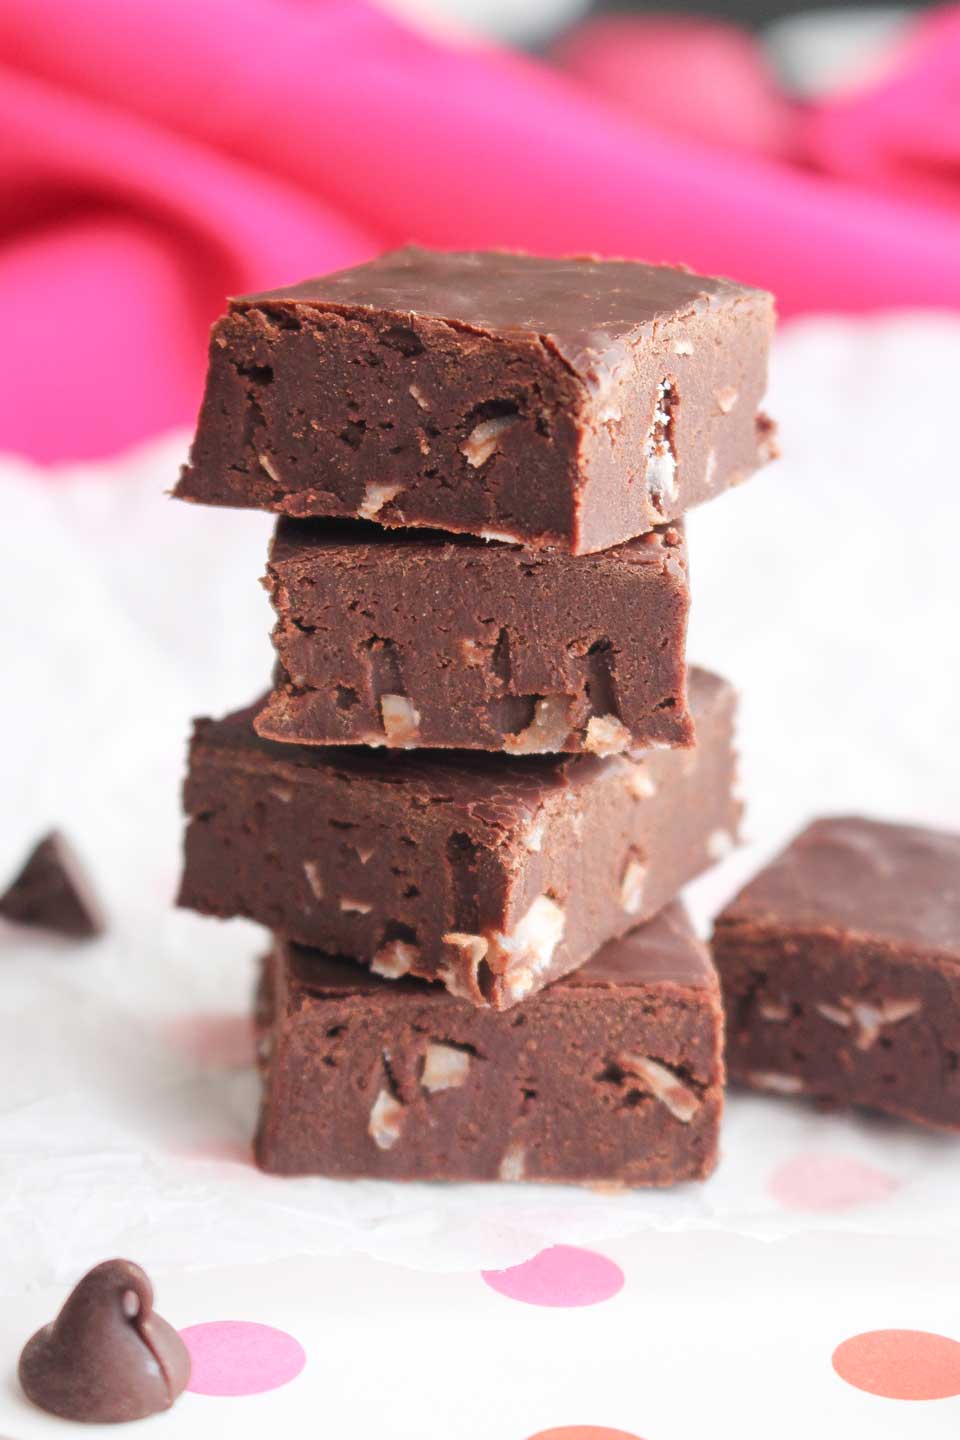 A collection of the 15 best fudge and candy recipes from some of my most talented blogger friends; Recipe collection compiled by Jane Bonacci, The Heritage Cook 2023